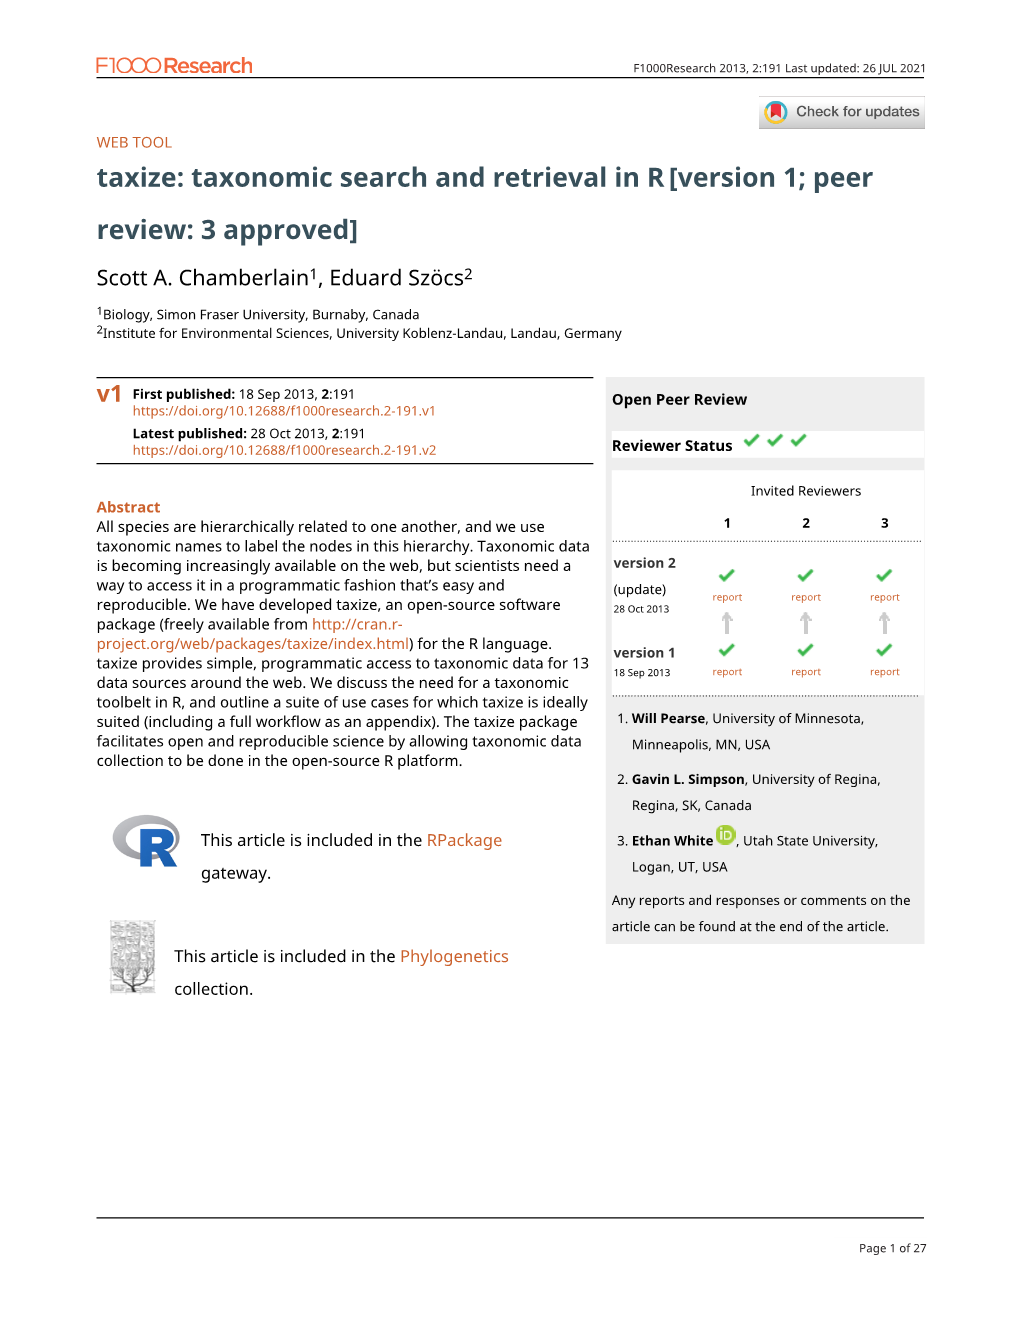 Taxize: Taxonomic Search and Retrieval in R[Version 1; Peer Review: 3